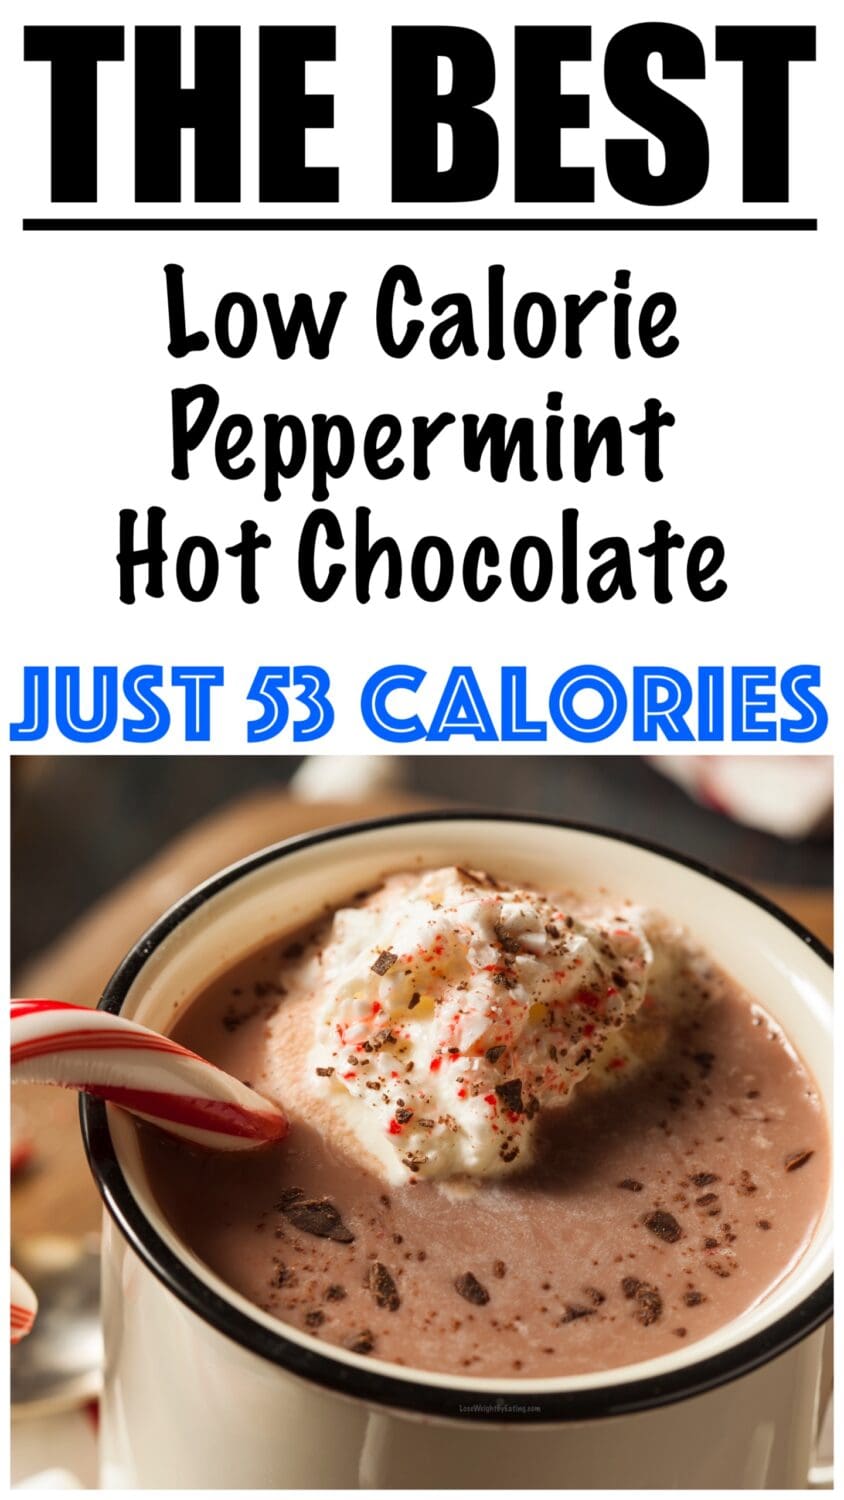 Low Calorie Peppermint Hot Chocolate